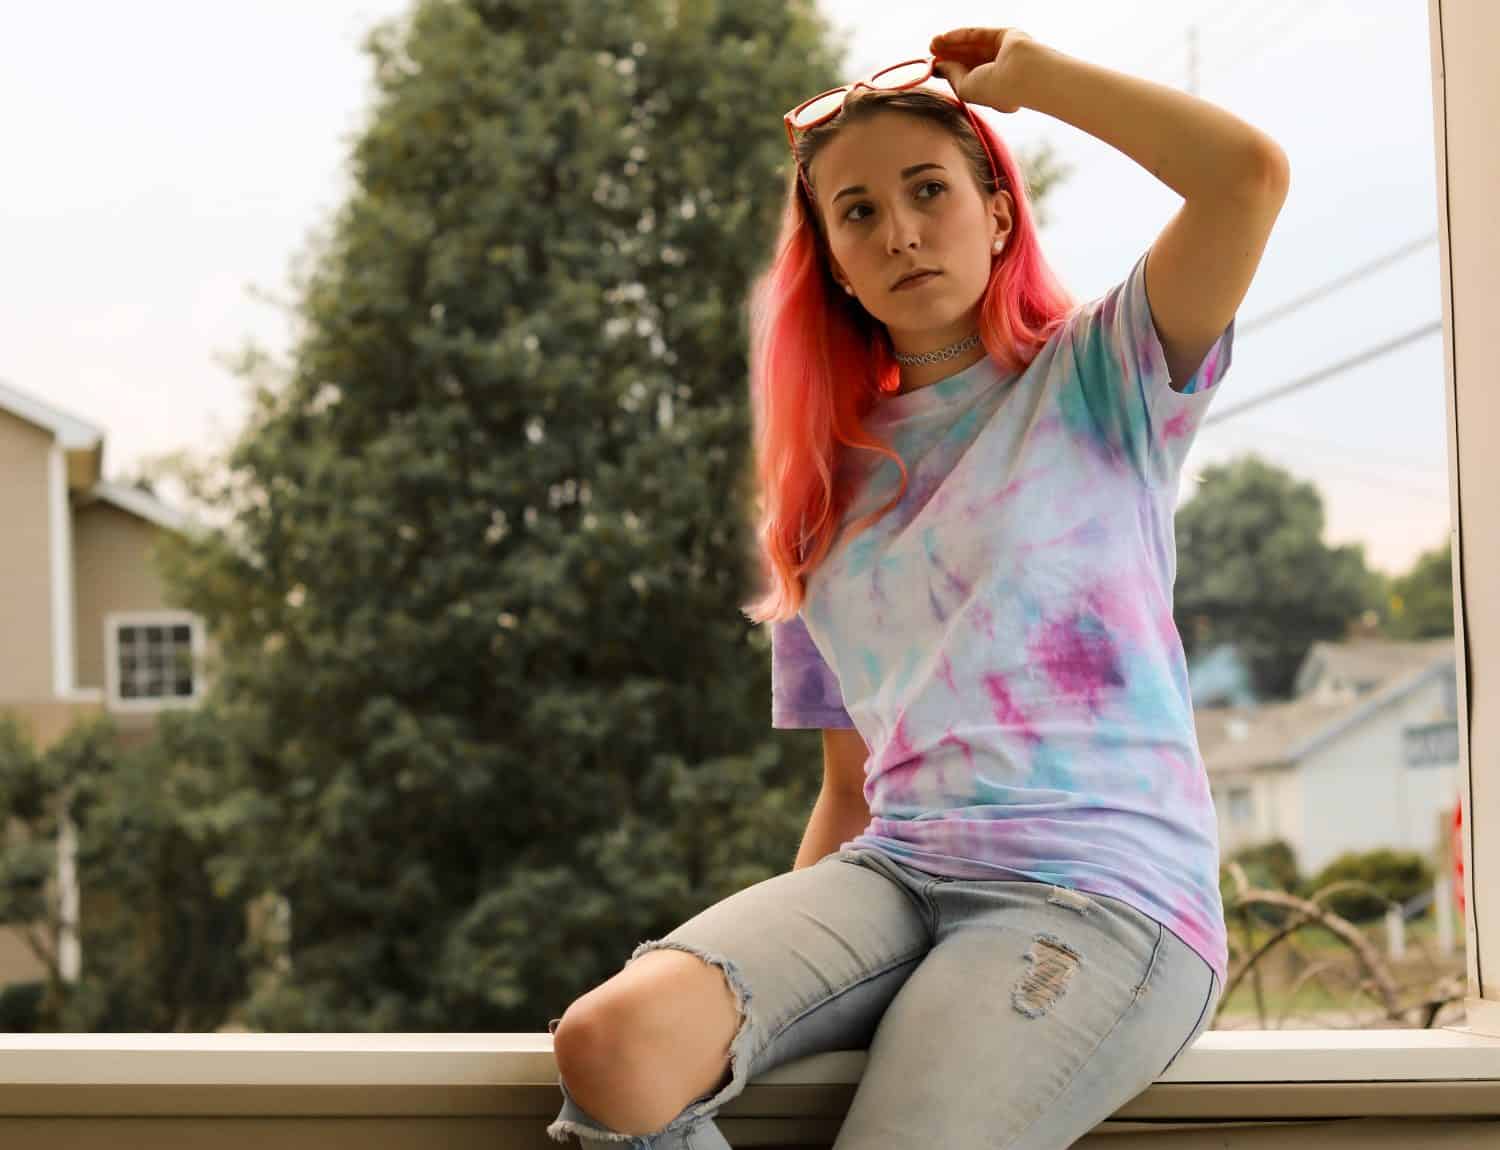 Young Pink Haired Woman Taking her Sunglasses Off in a Tie Dye Tee Shirt